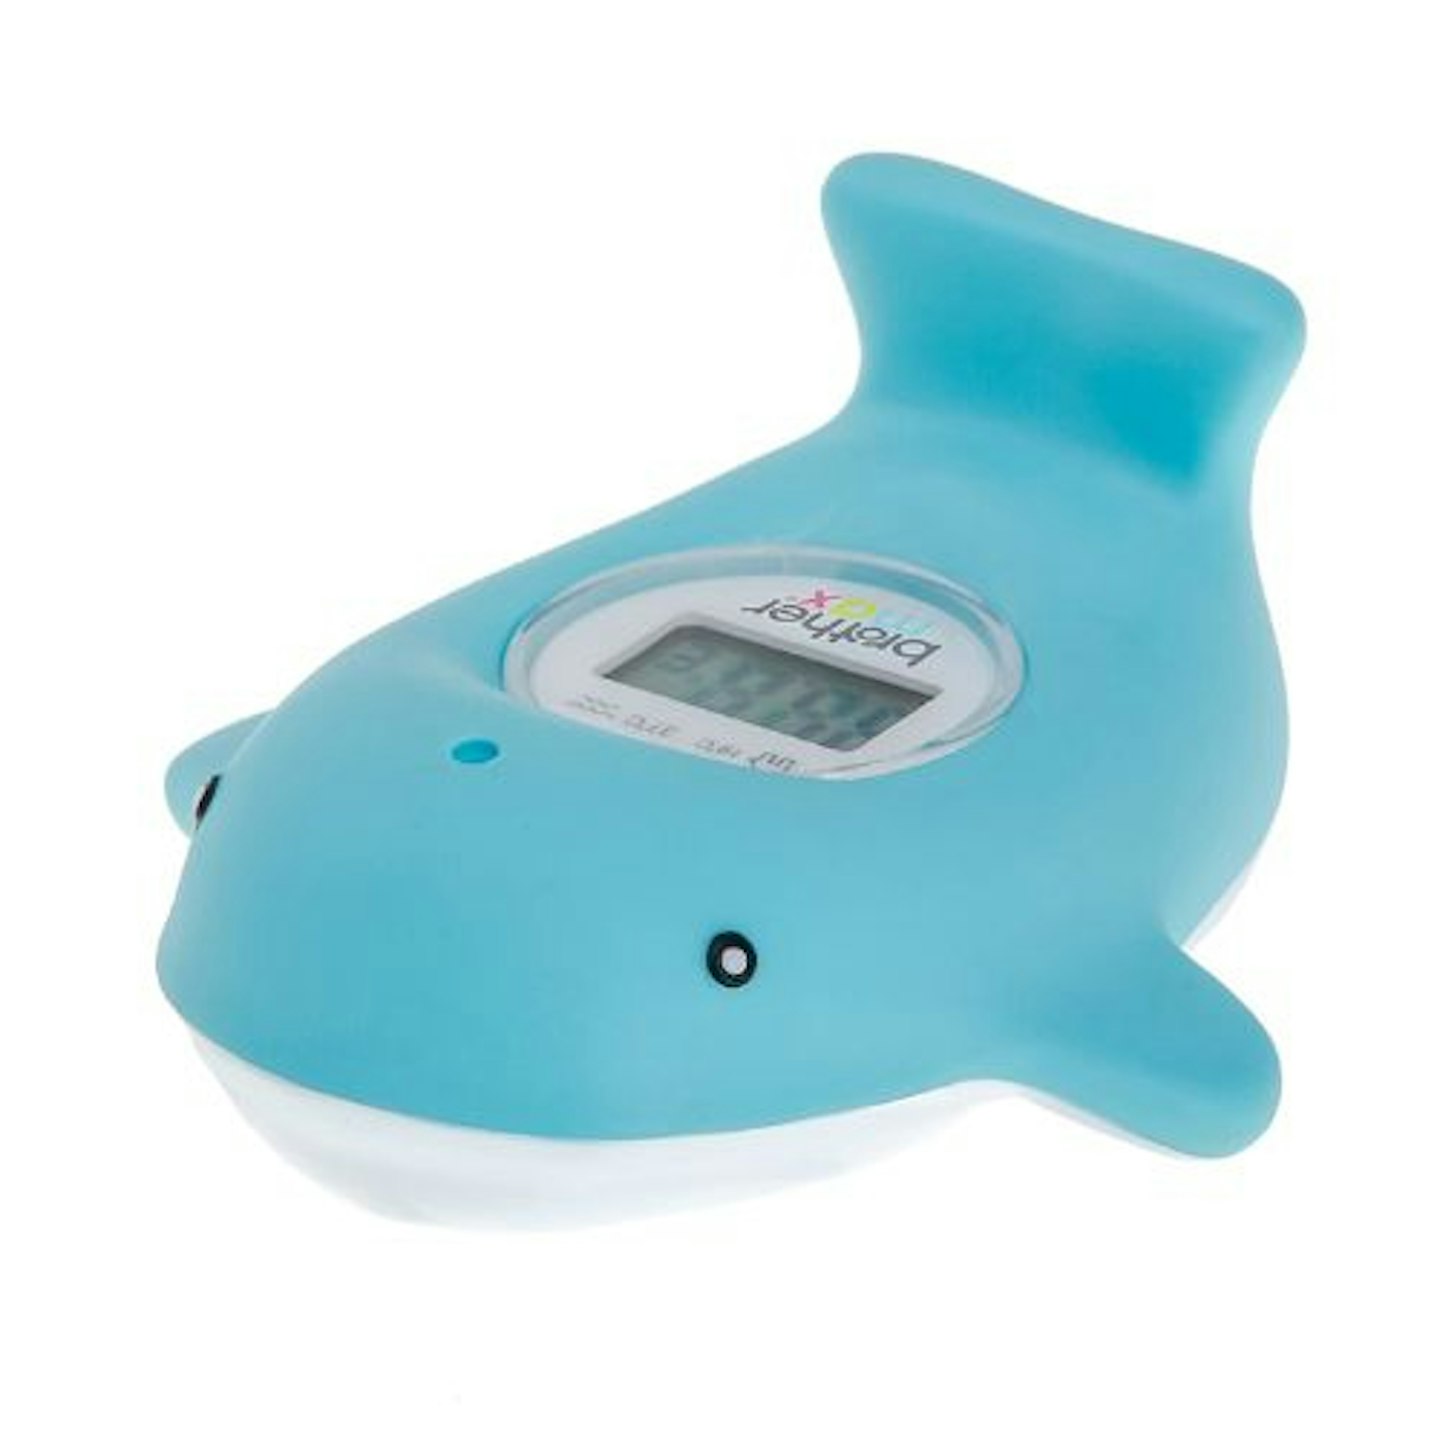 Brother 70964BL2 Max Whale Digital Bath and Room Thermometer